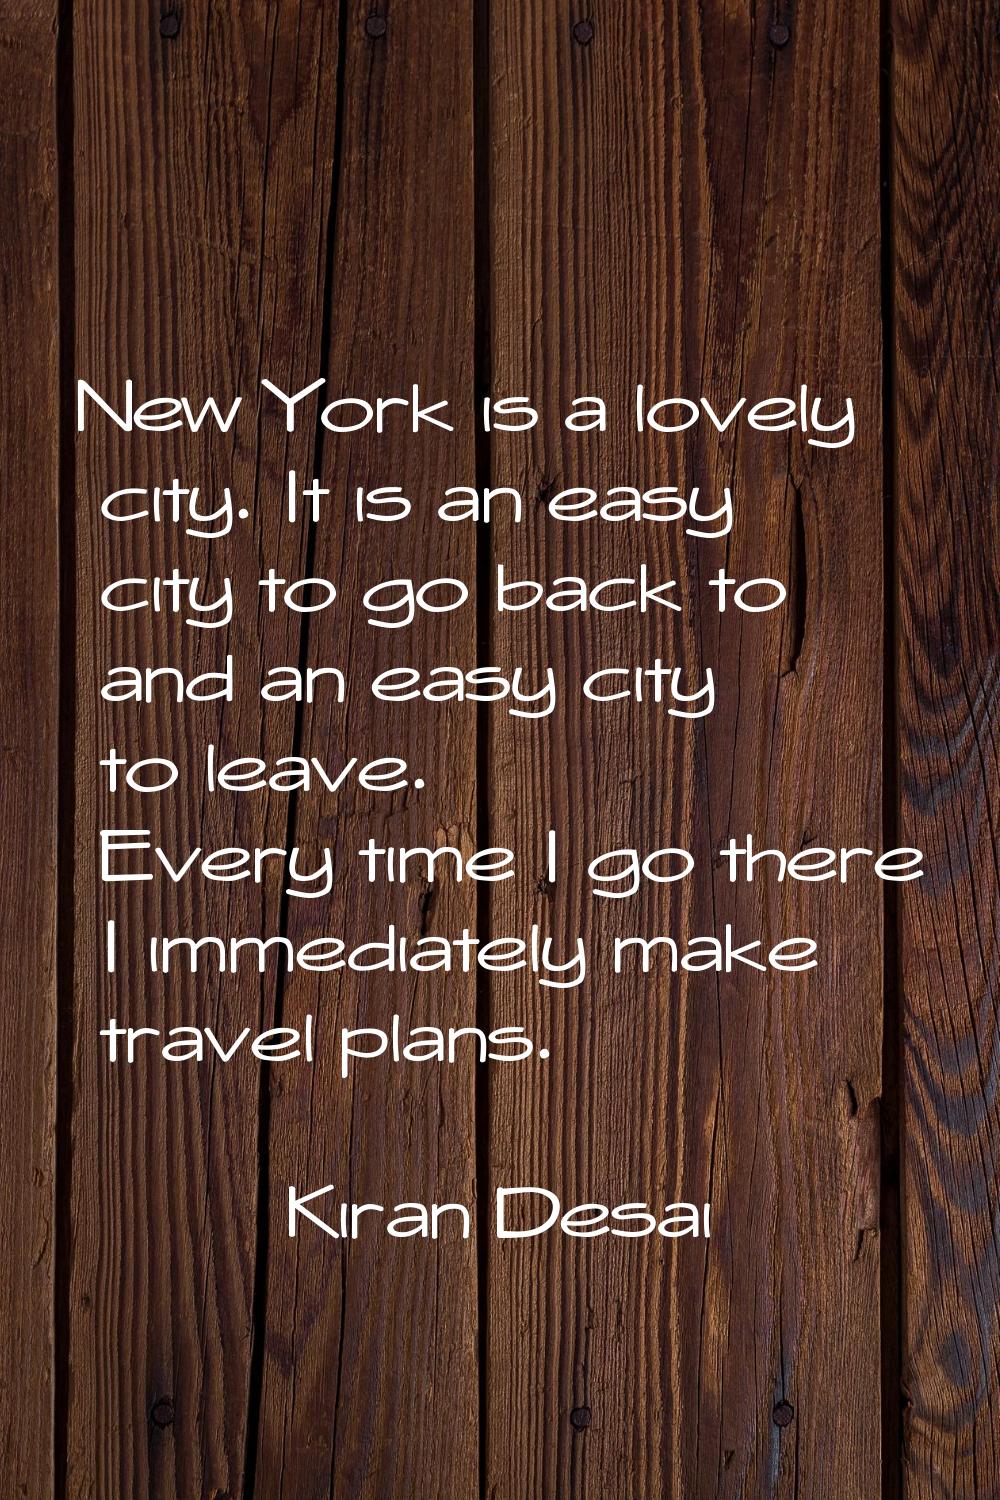 New York is a lovely city. It is an easy city to go back to and an easy city to leave. Every time I